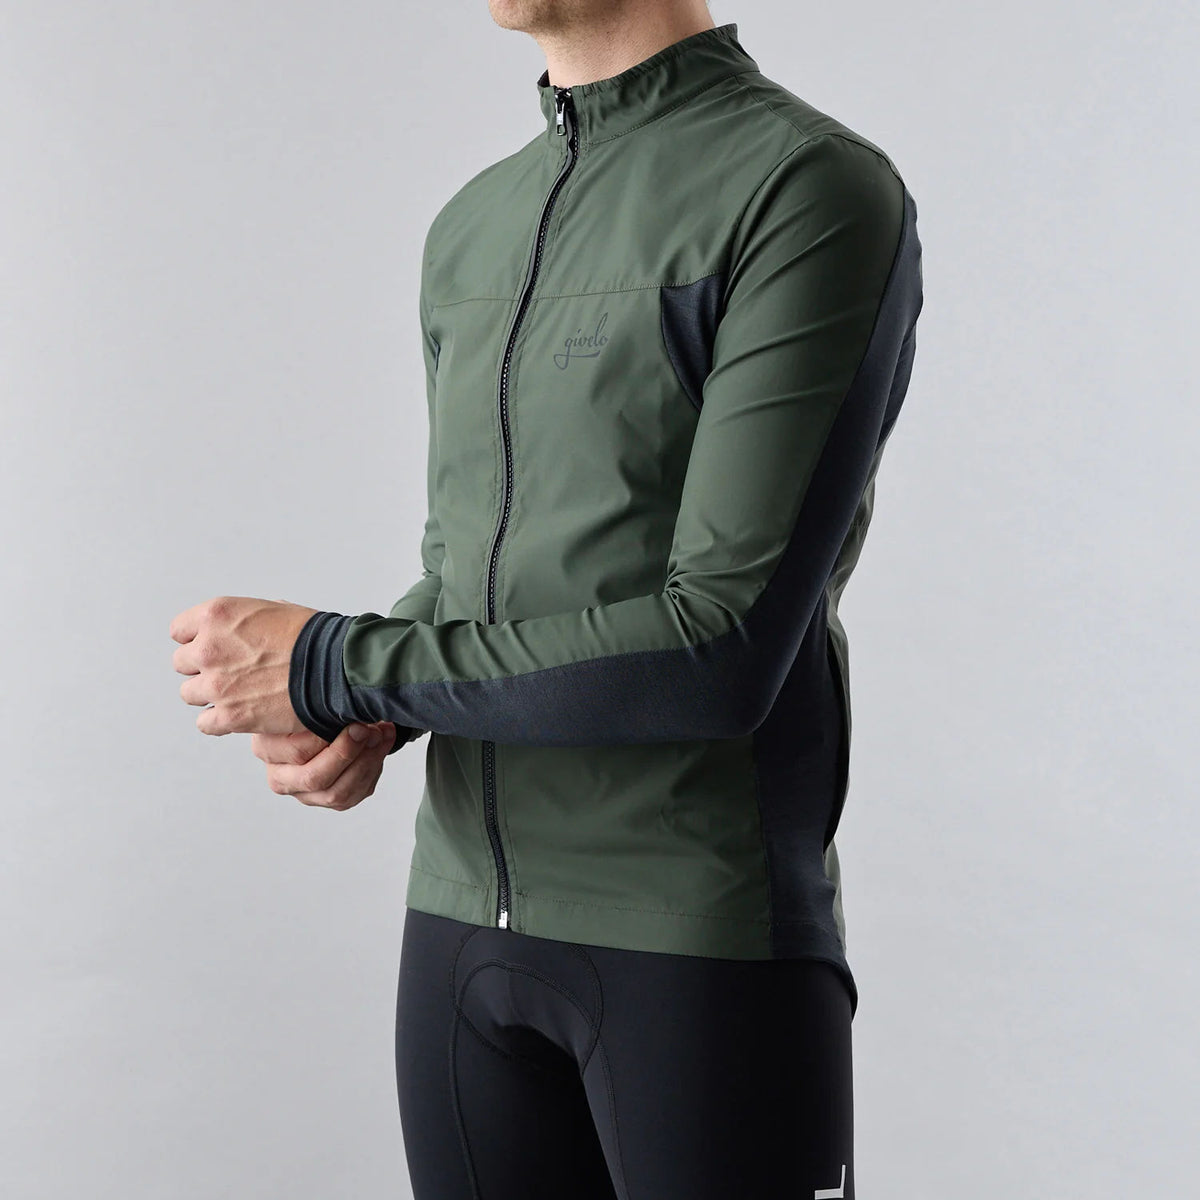 Givelo Military Green Quick Free サイクル ウィンドジャケット | GEARED